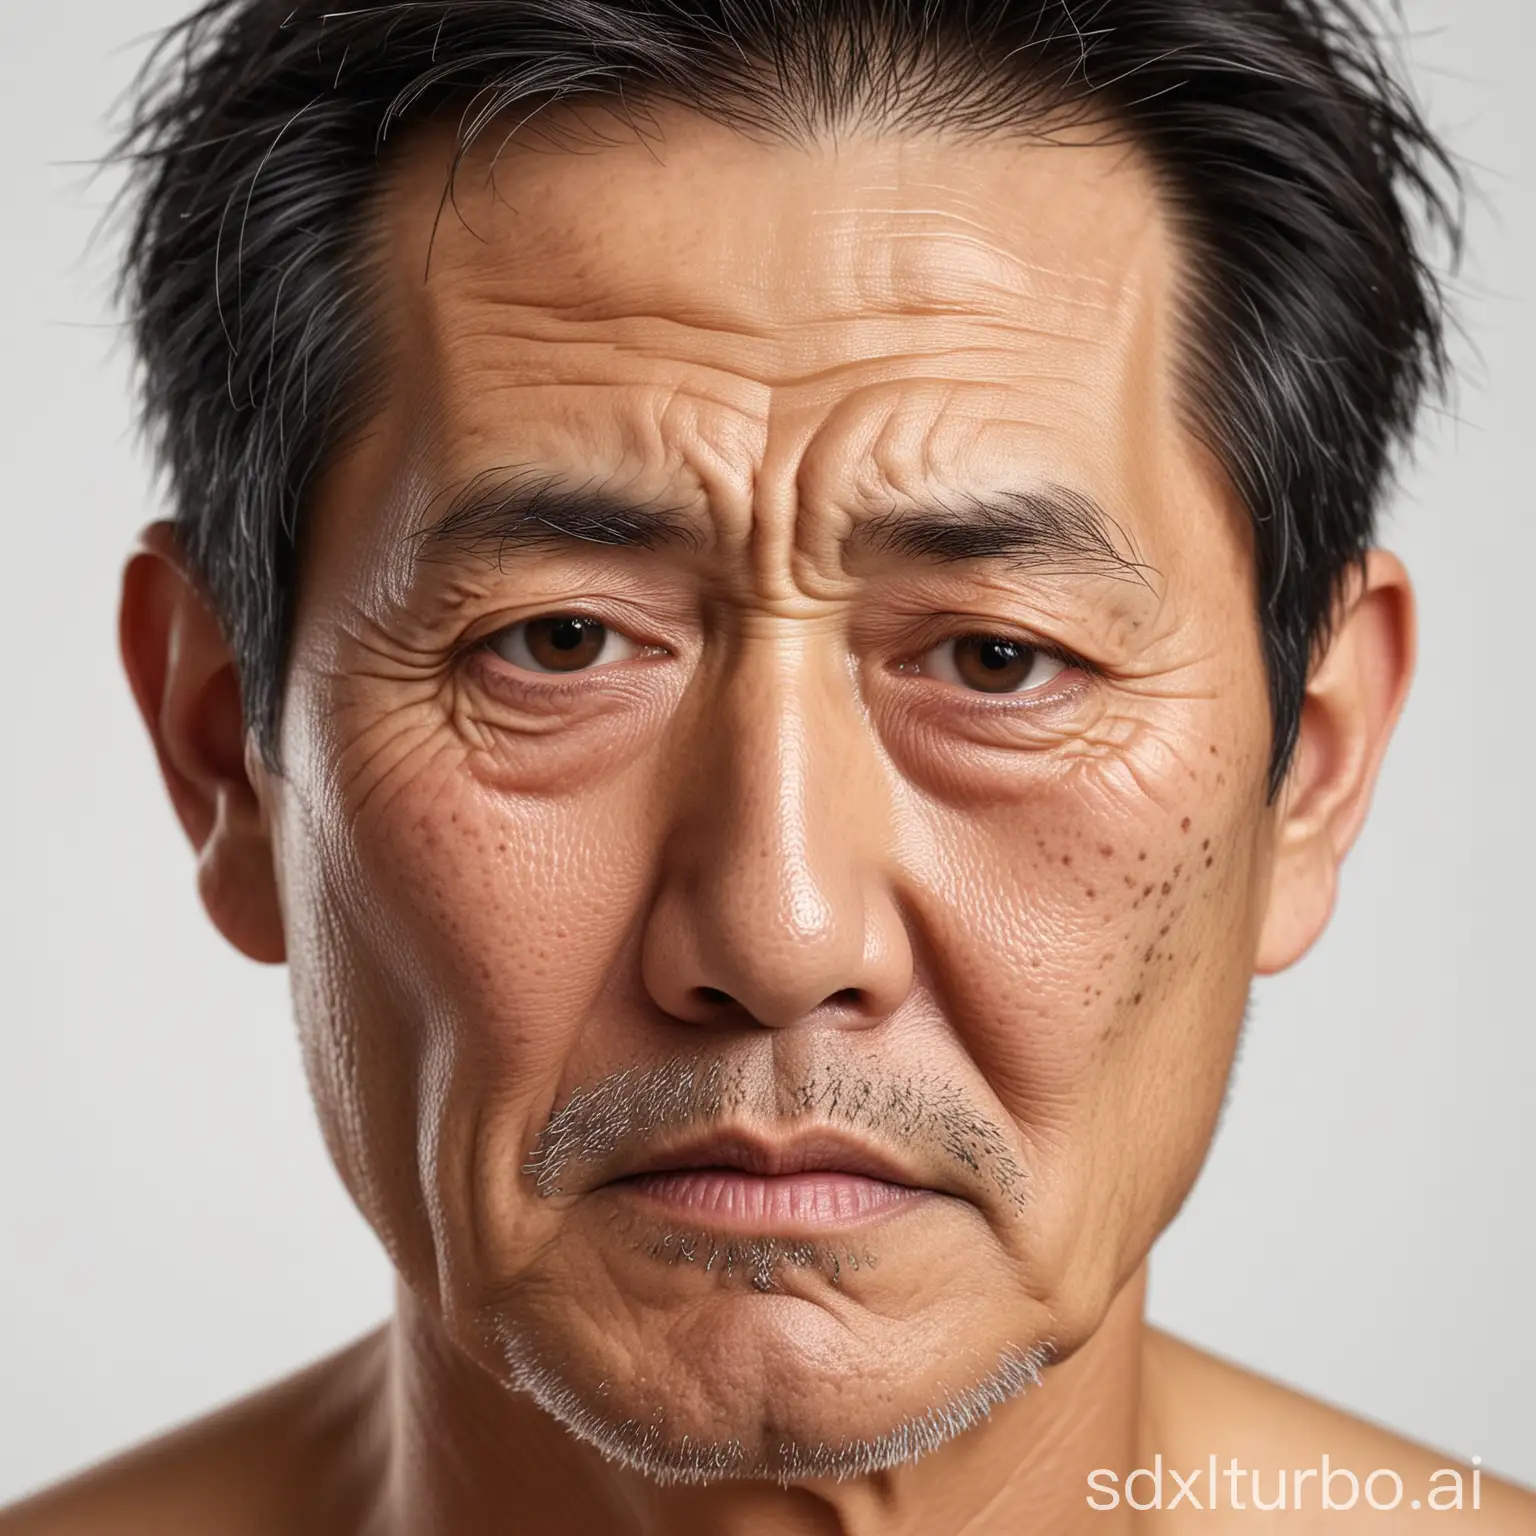 Closeup-Portrait-of-Angry-Mature-Asian-Man-with-Frowning-Expression